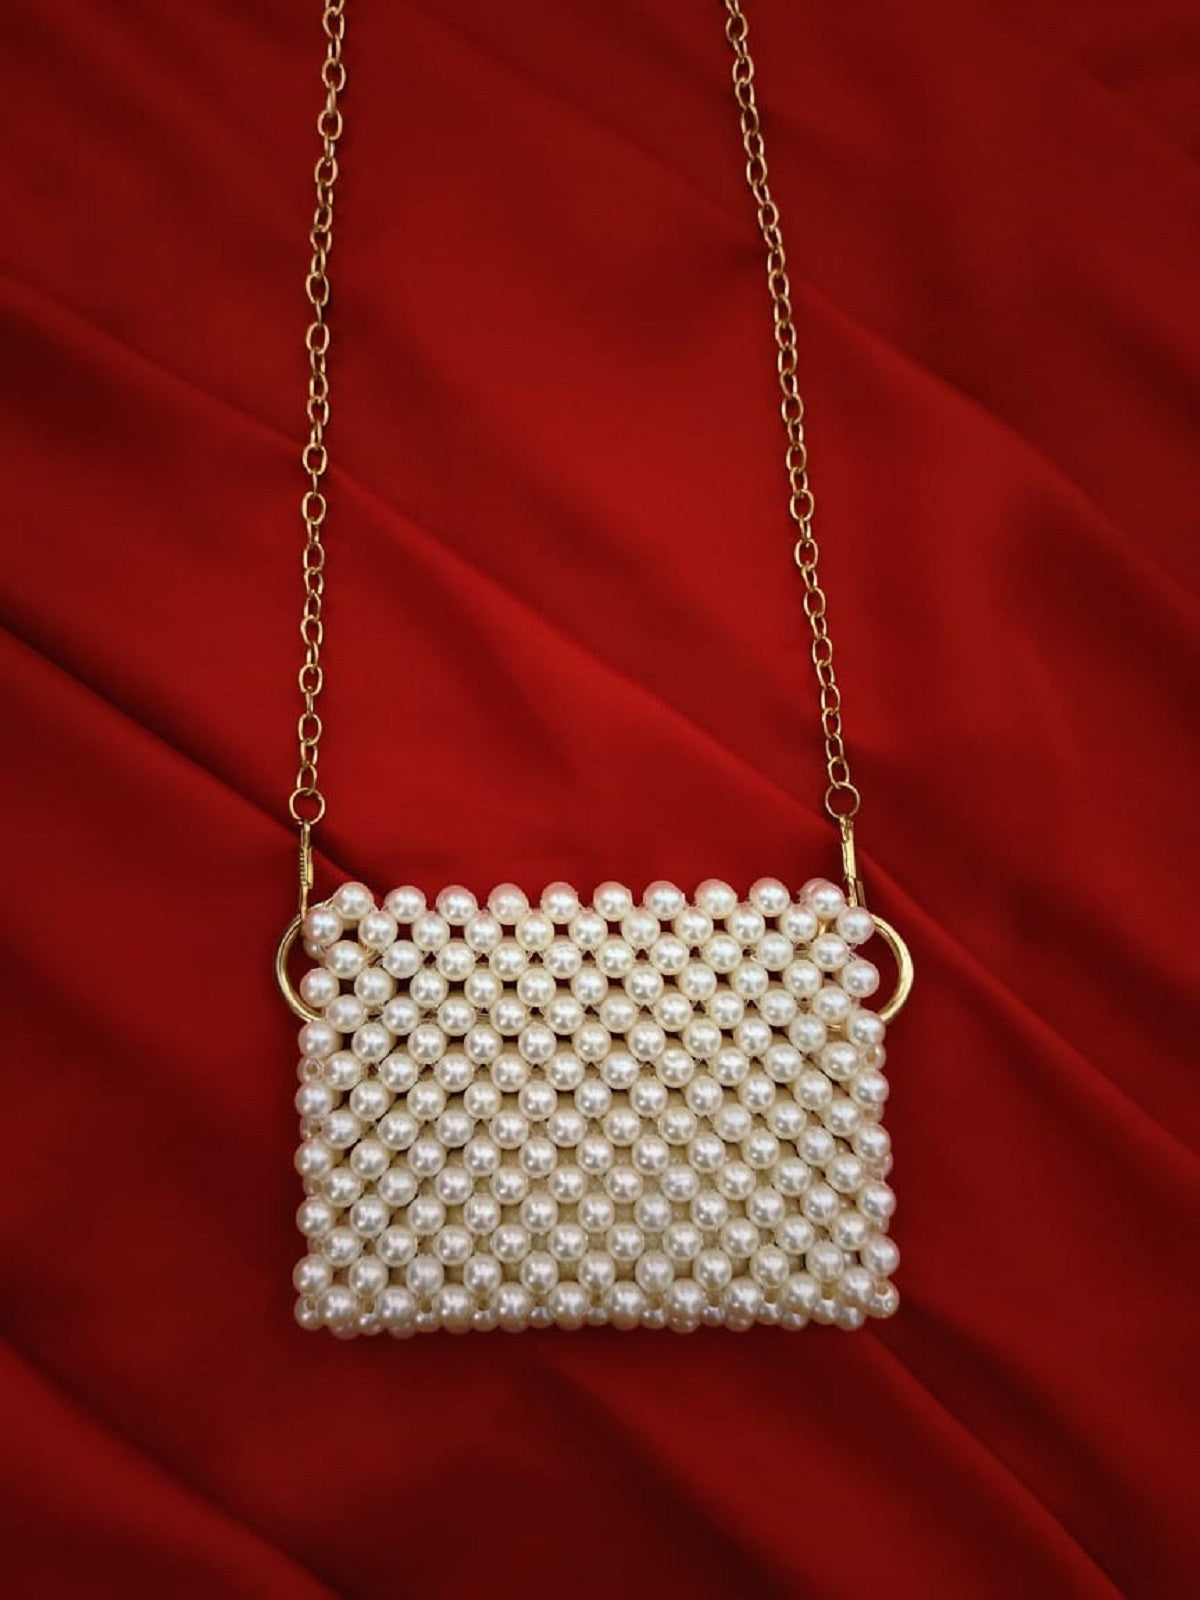 Close-up of a handcrafted mini off-white beaded pouch with intricate beadwork patterns